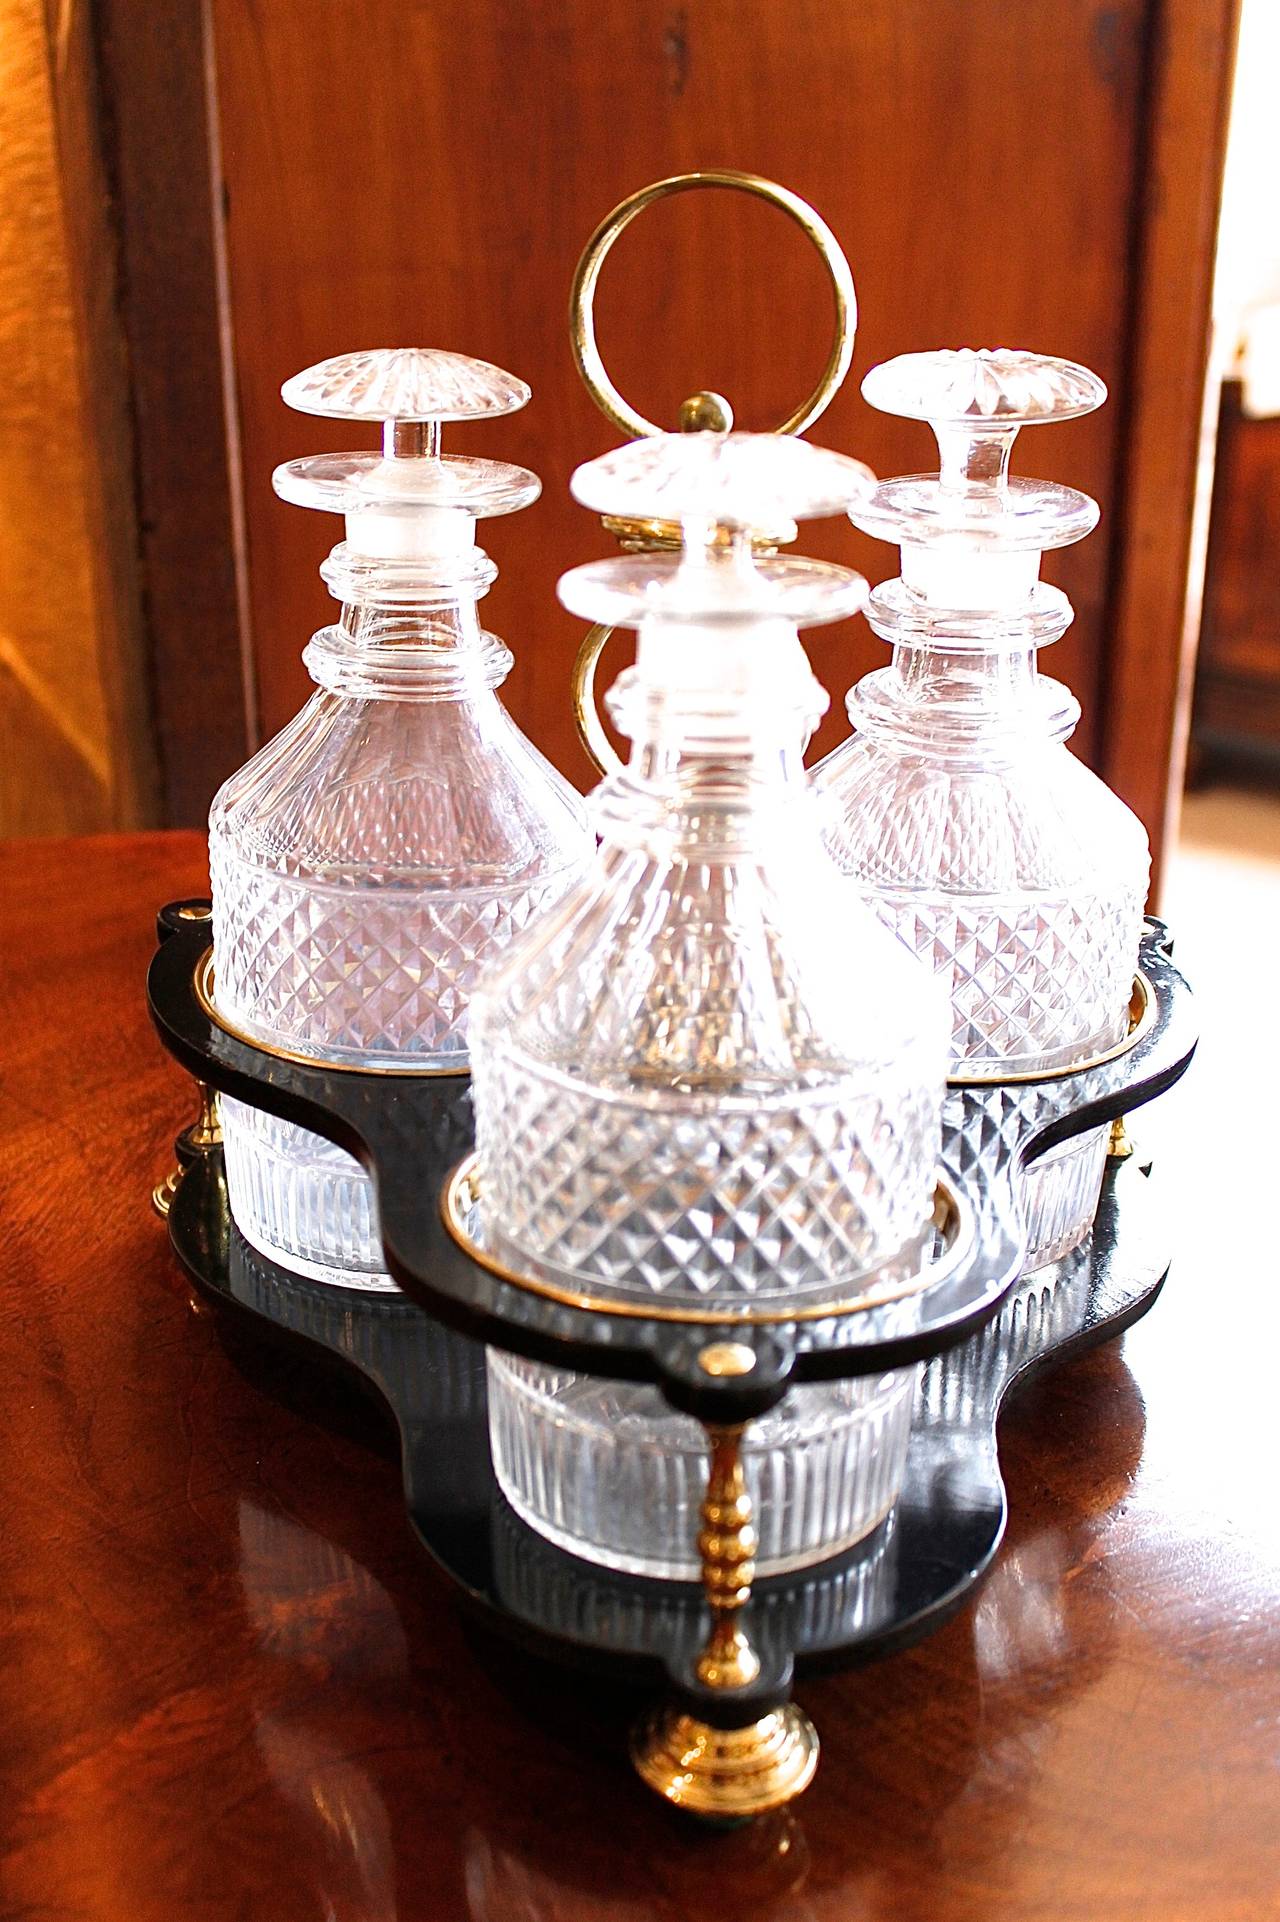 A fine set of three early 19th century matching blown and cut glass small liqueur decanters with double ring necks, fitted with a later Victorian custom made papier maché and brass tripodal caddy with a central handle. All in very good